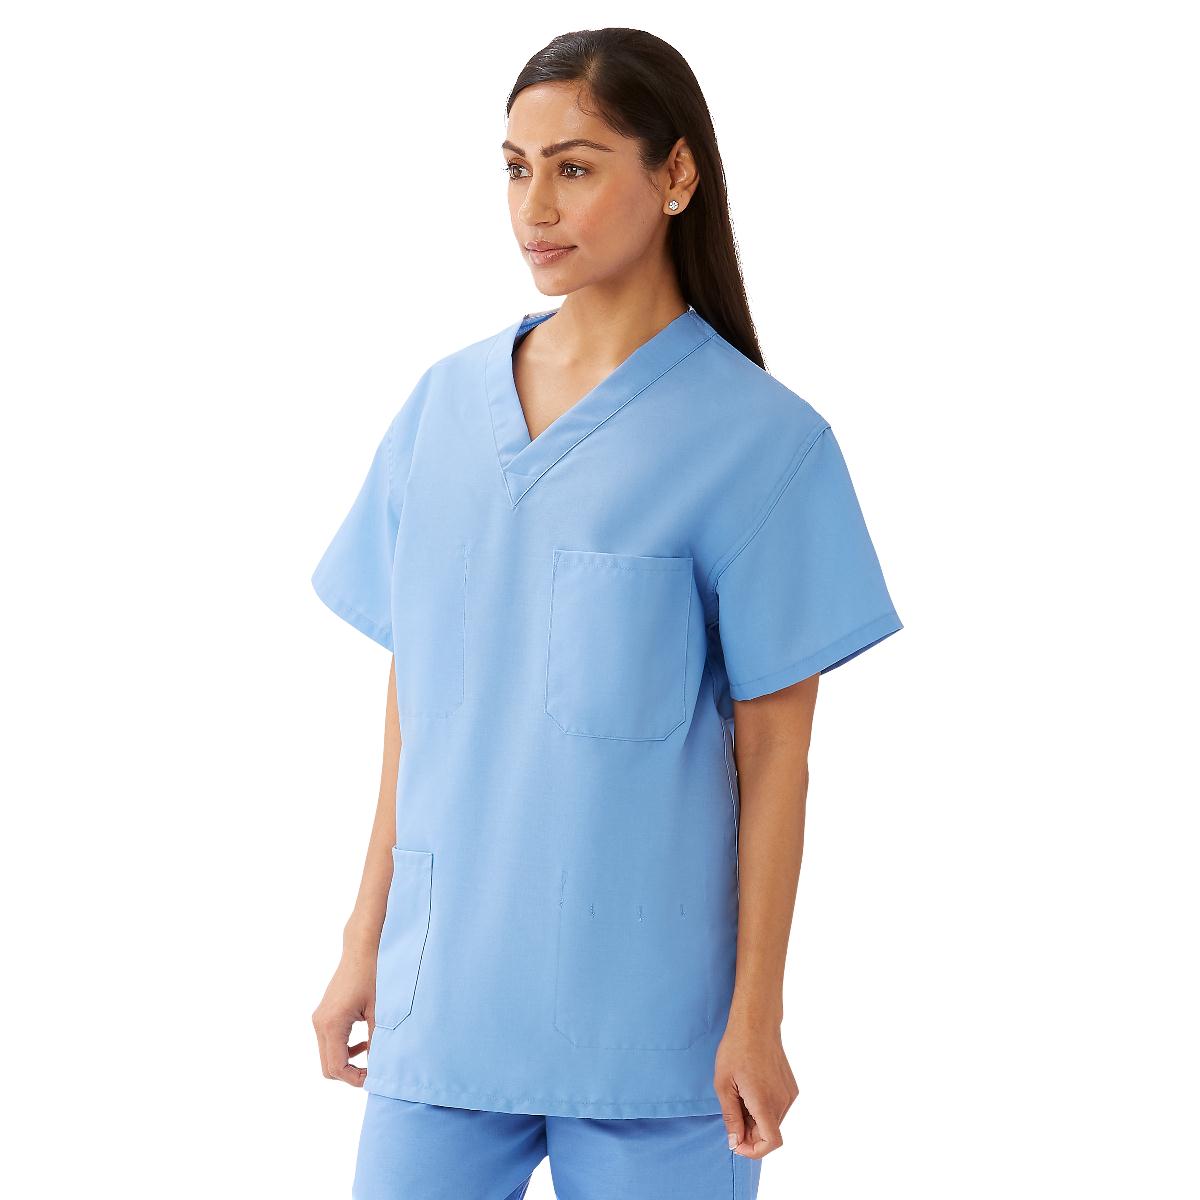 Get Medline Disposable Blue Scrub Pants at Harmony for less.